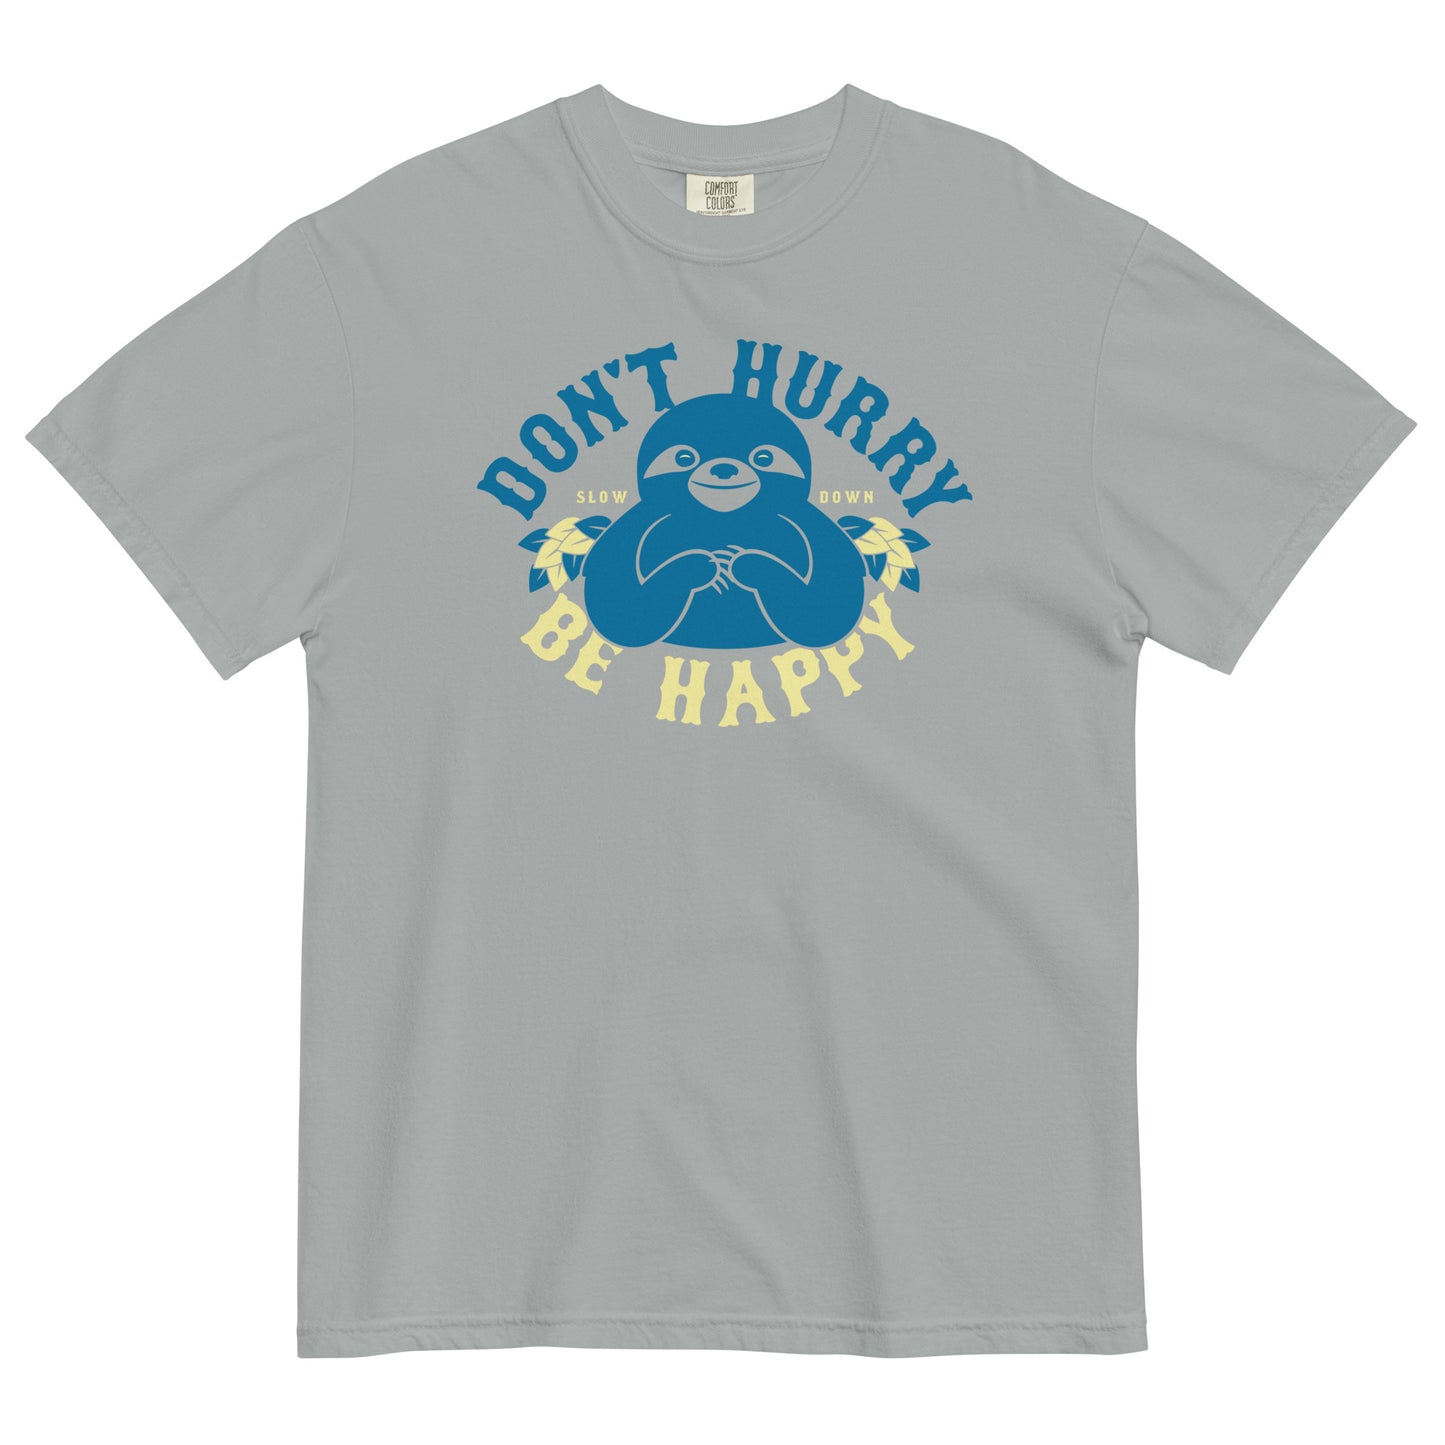 Don't Hurry Be Happy Men's Relaxed Fit Tee